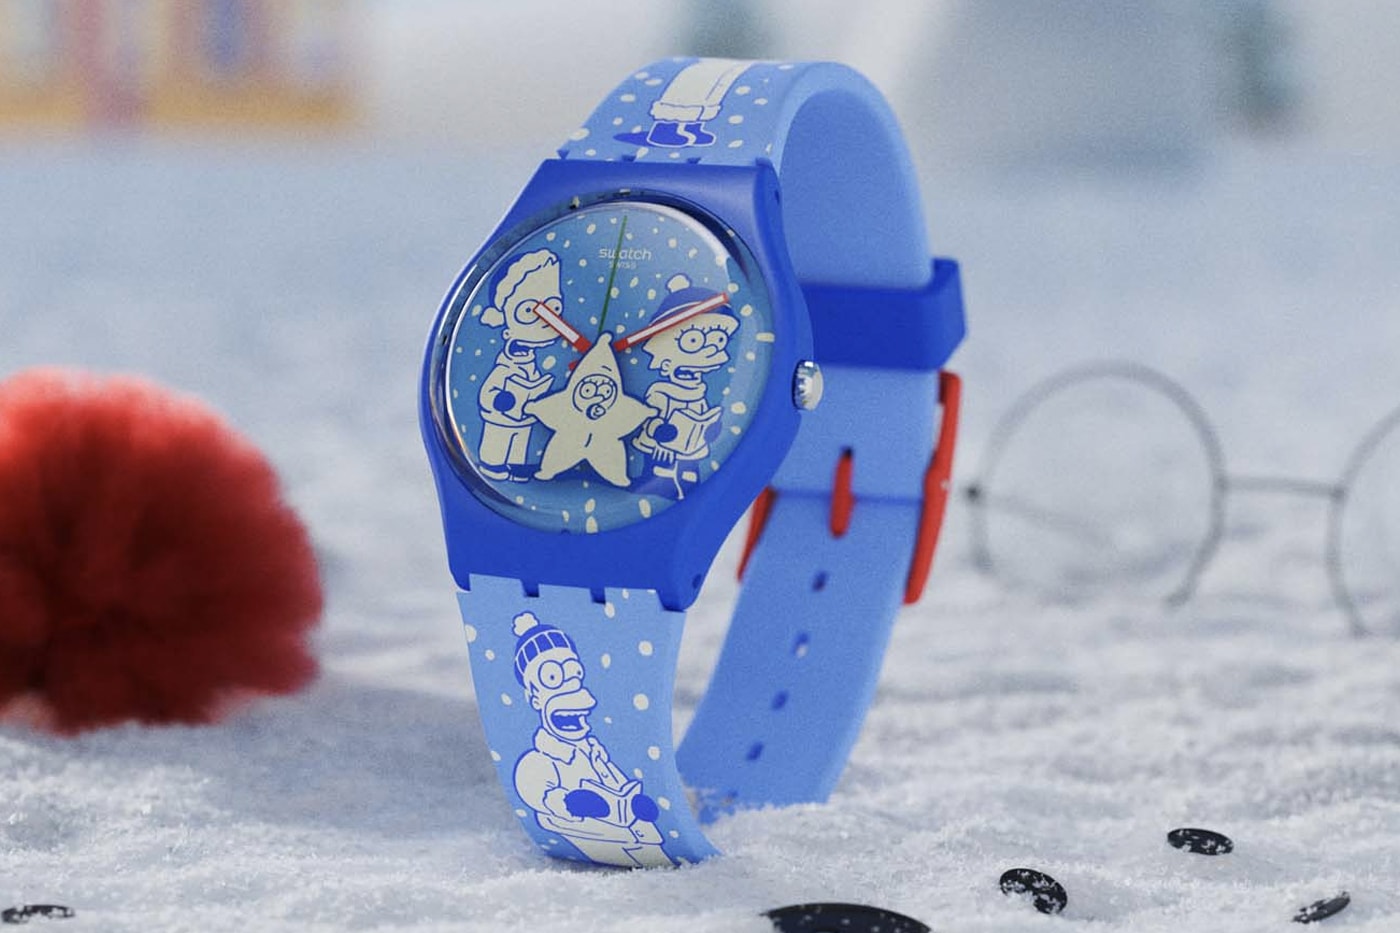 It's a 'Simpson' Christmas This Year at Swatch the simpsons multi-piece everyday watch collection winter holiday